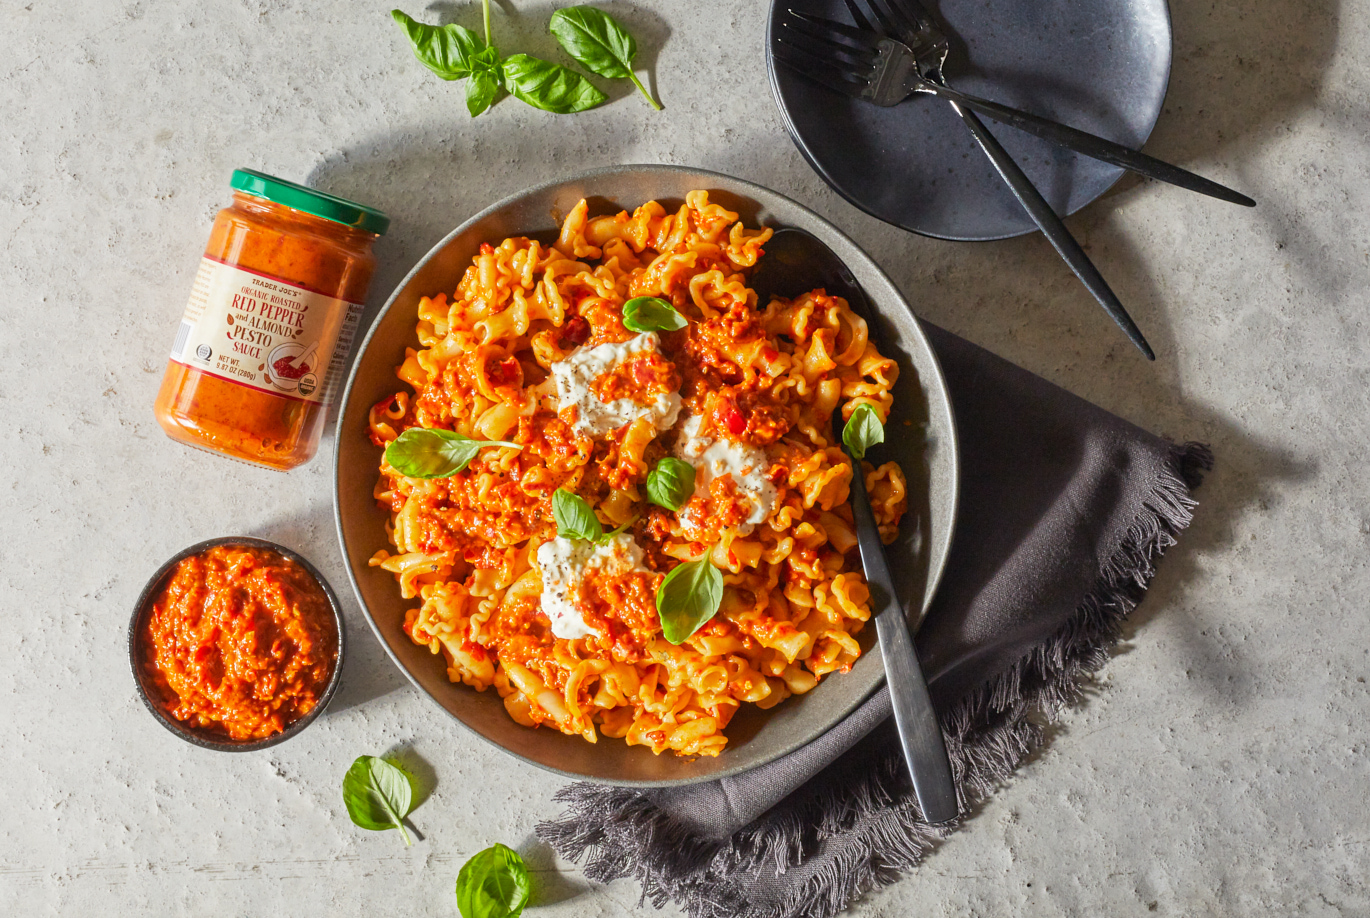 Organic Roasted Red Pepper and Almond Pesto Sauce